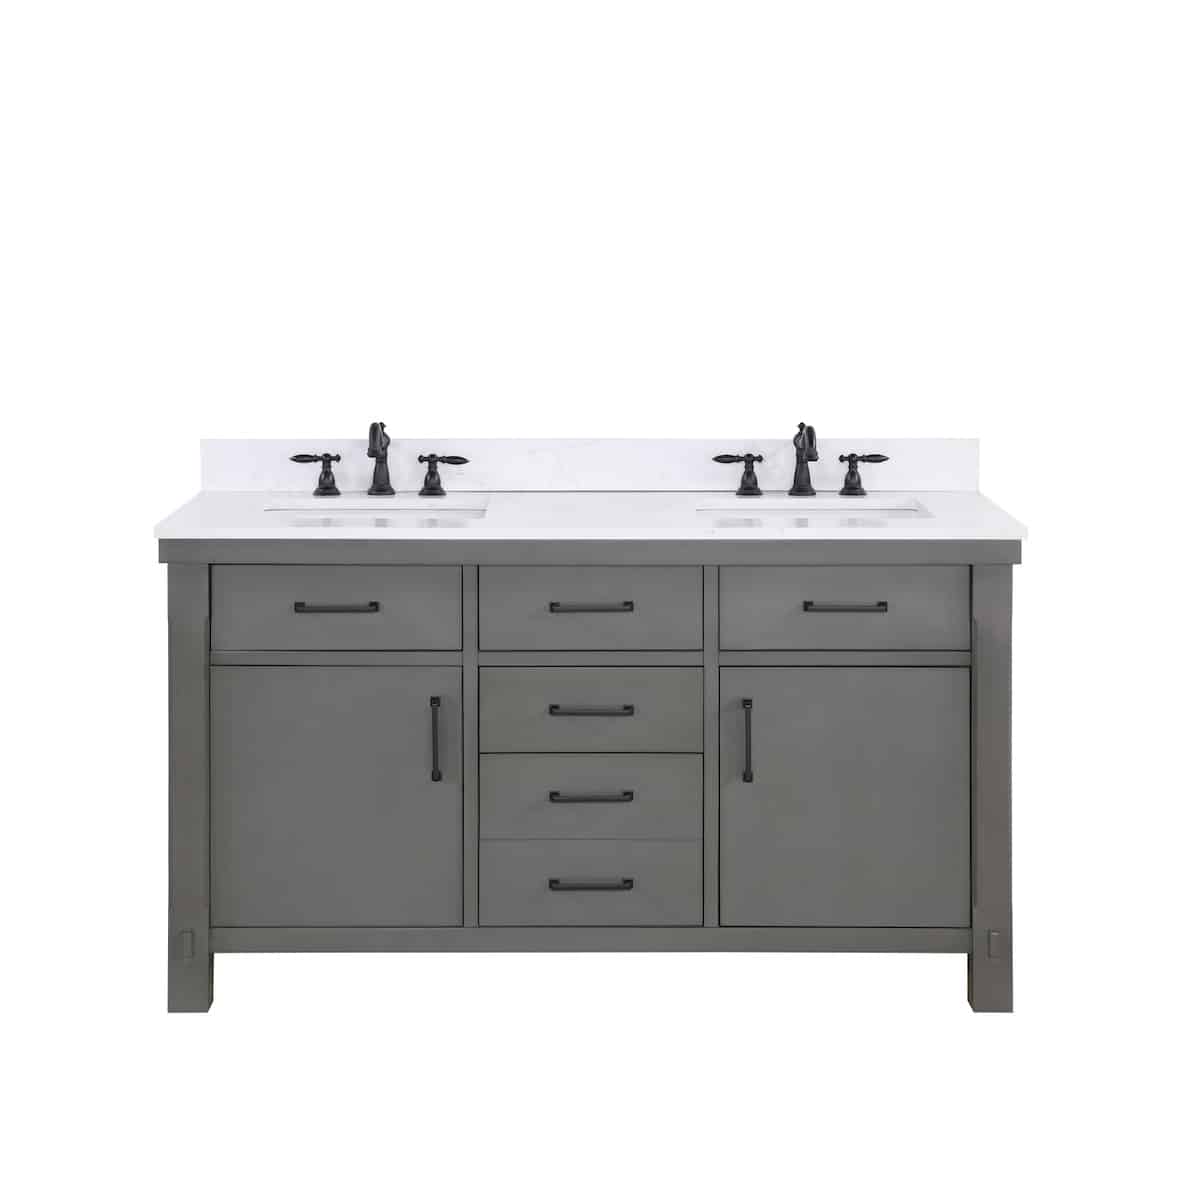 Vinnova Viella 60 Inch Double Sink Bath Vanity in Rust Grey Finish with White Composite Countertop Without Mirror 701860-RU-WS-NM